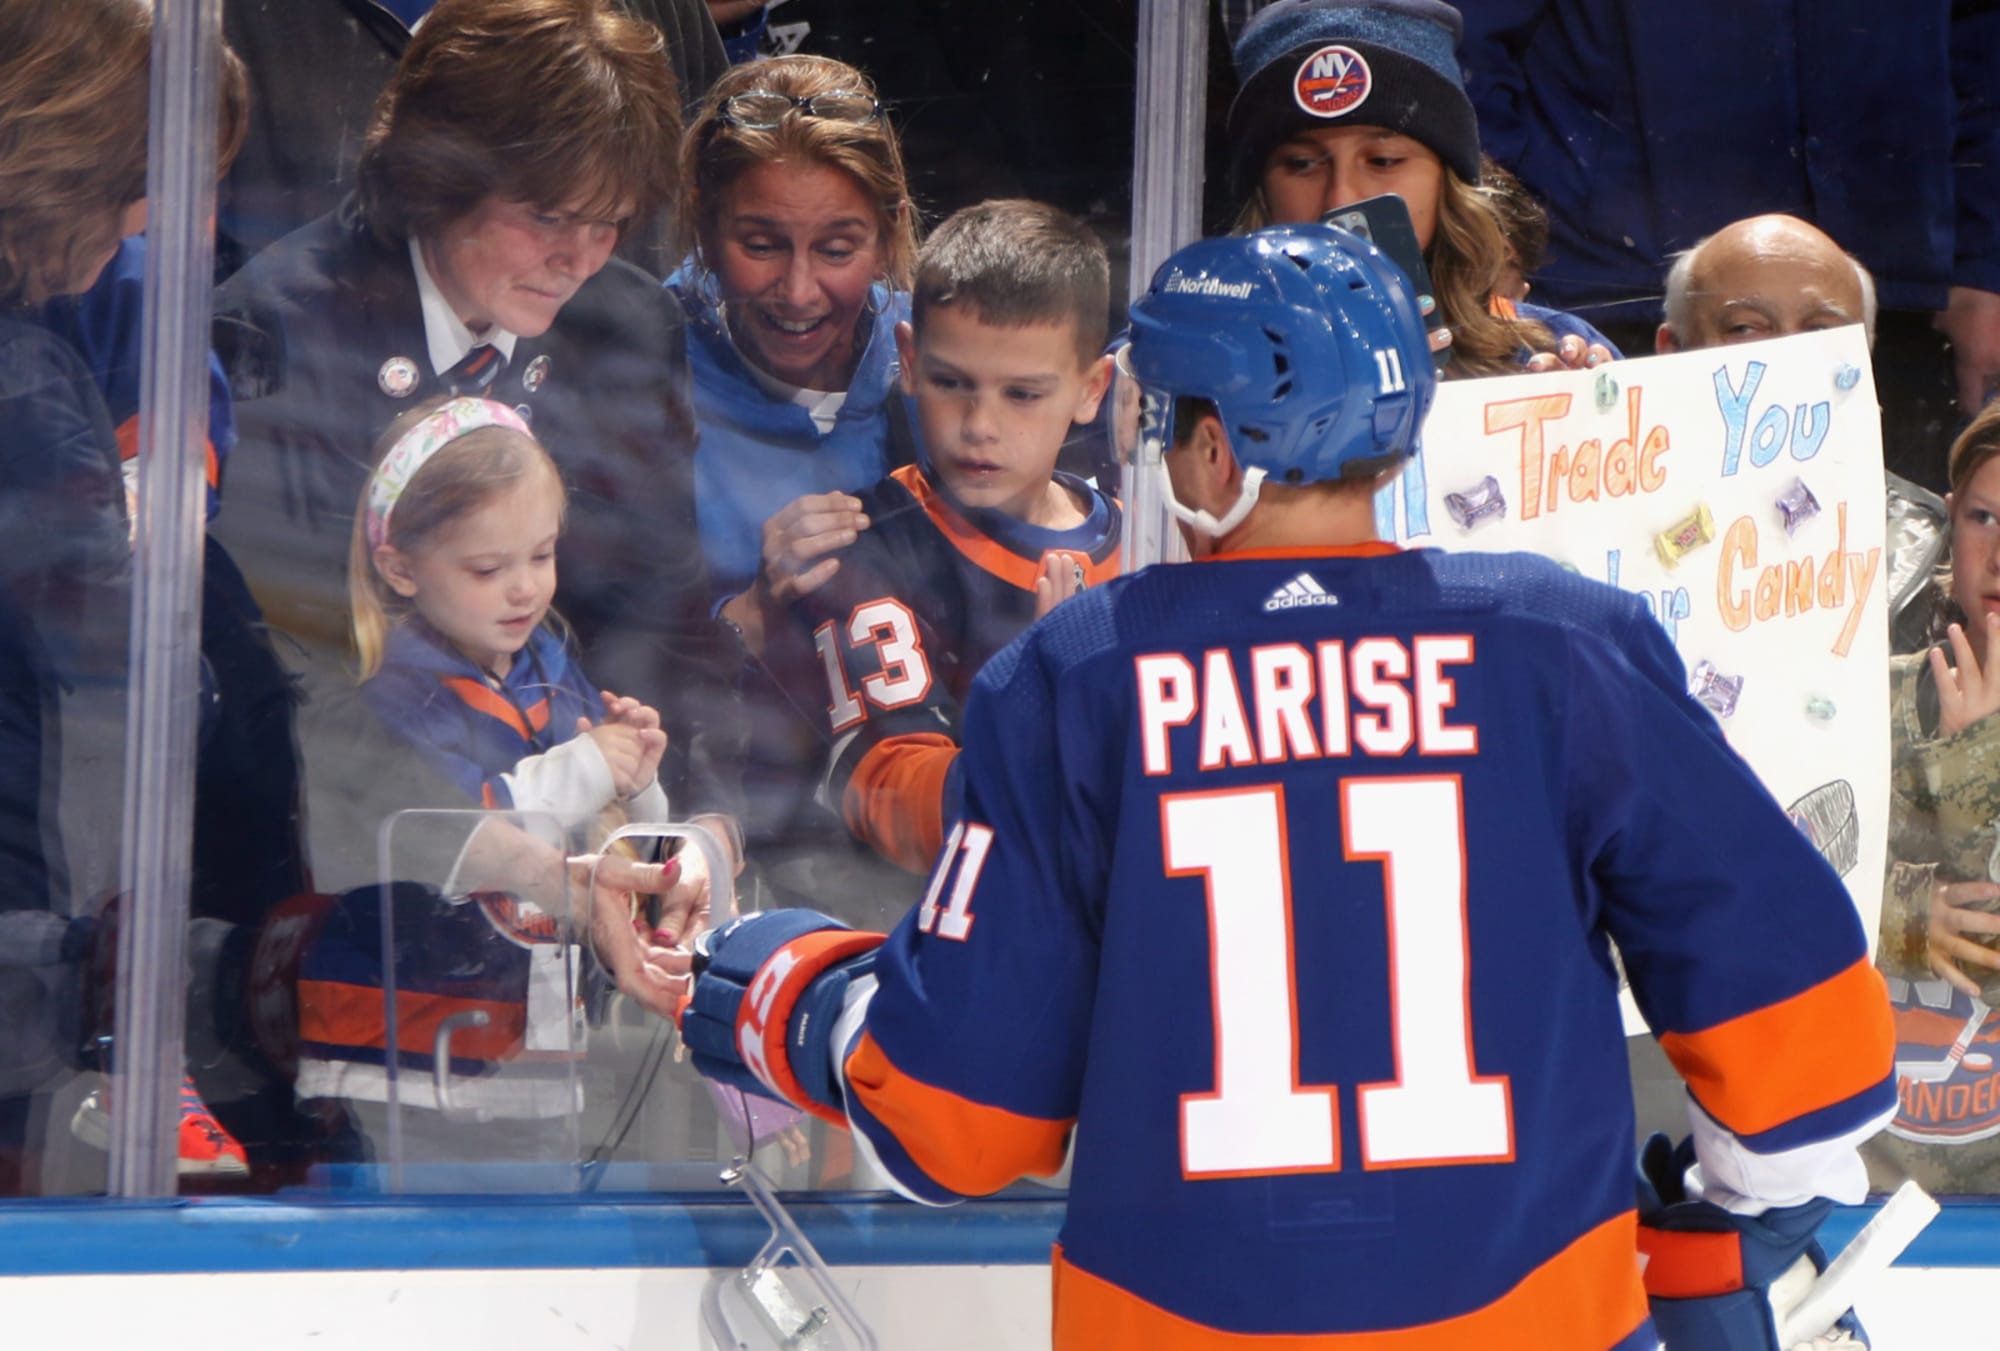 Parise and NHL teammates make the day for kids